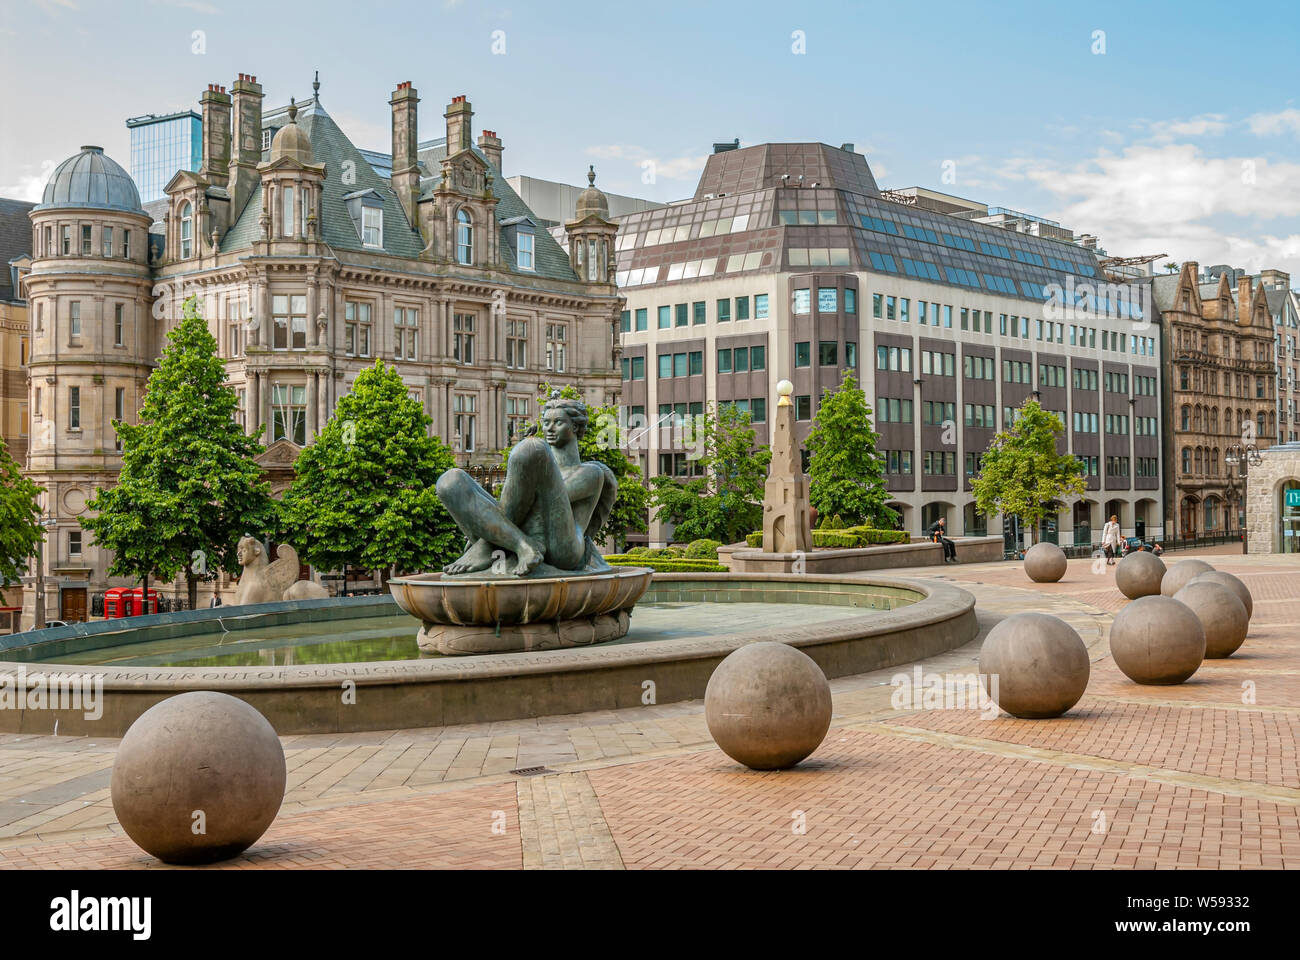 Artwork in front of the Birmingham Museum & Art Gallery, England. Stock Photo